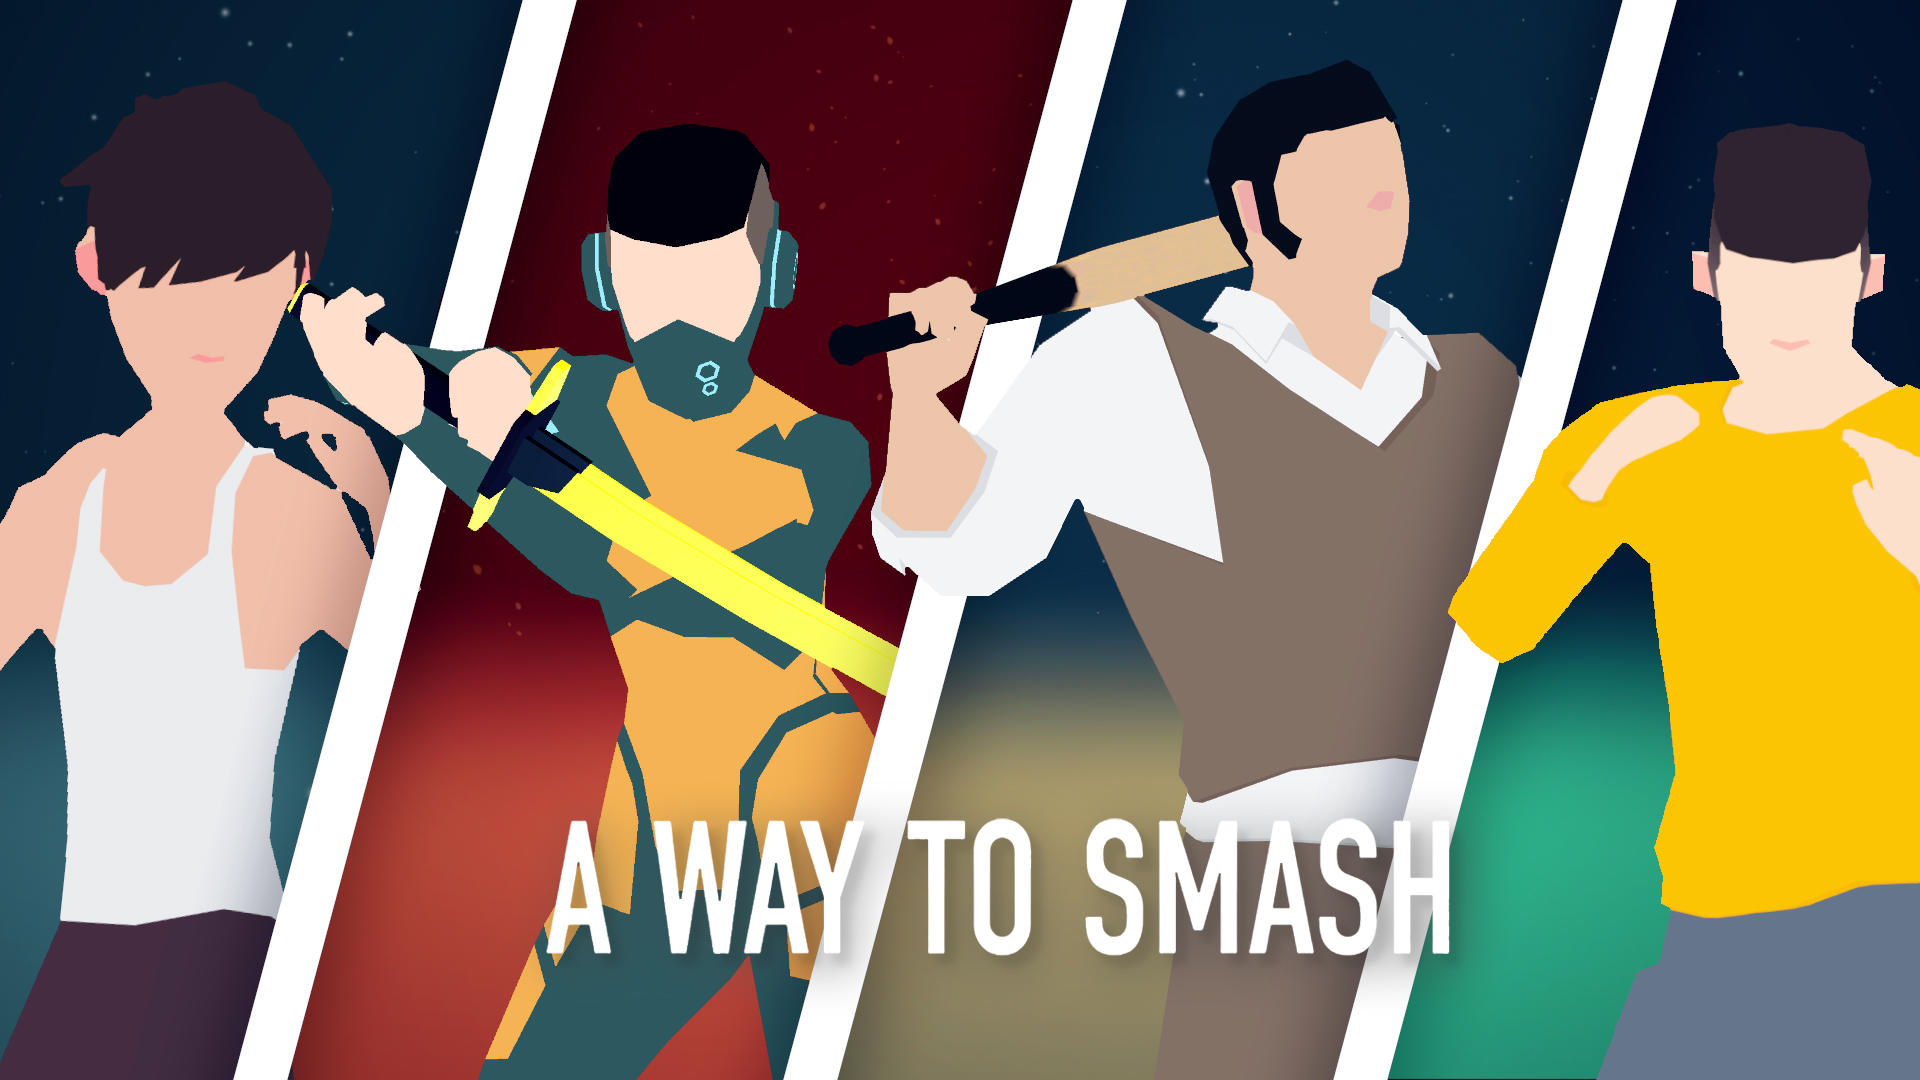 Banner of A Way To Smash: Logic 3D Fight 